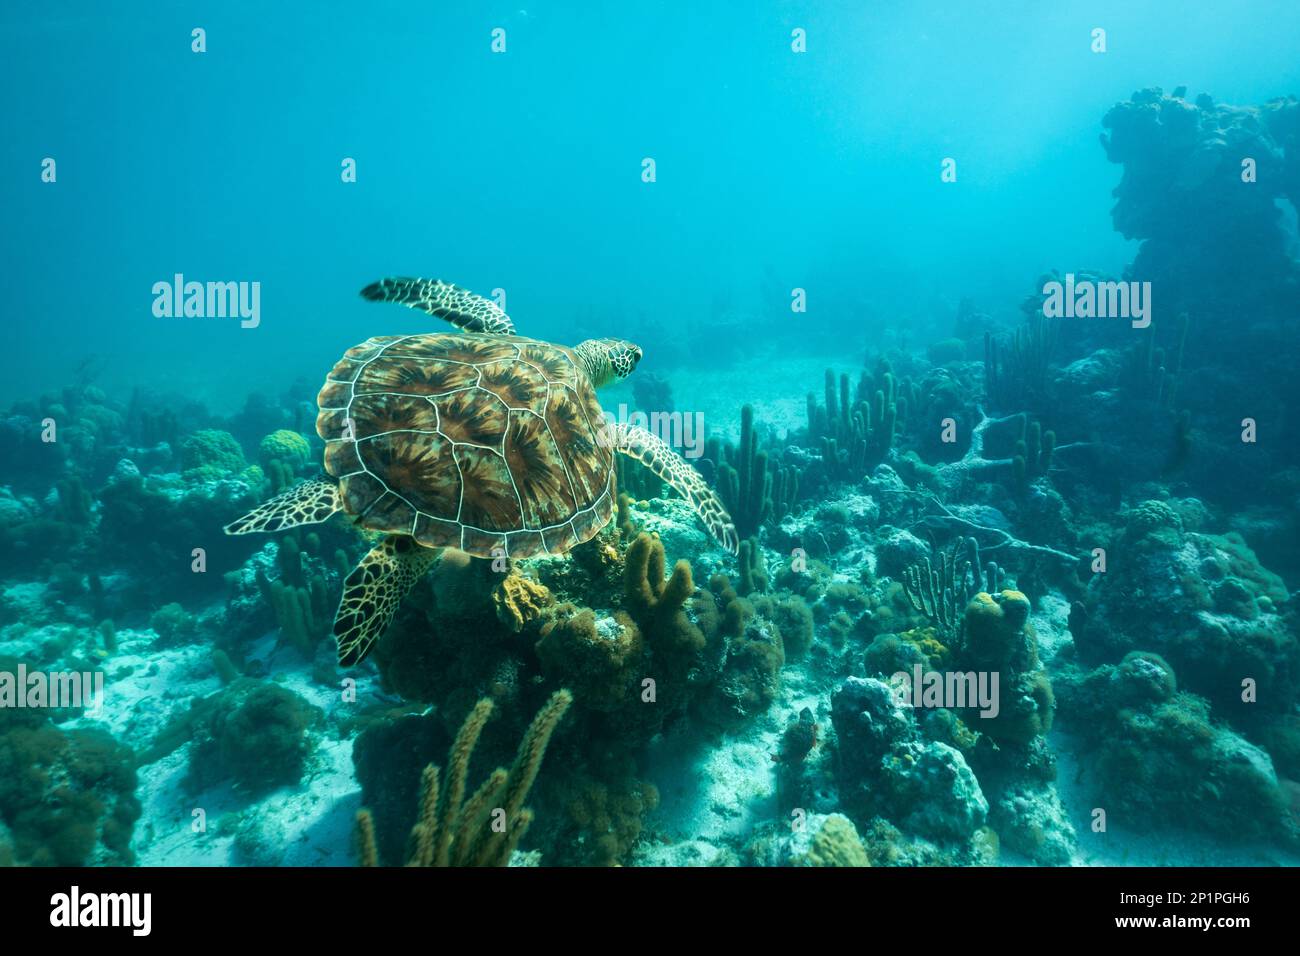 An adult green sea turtle swims over a shallow coral reef and sea grass bed in the turquoise ocean waters of Smith's Reef, Turks and Caicos Islands. Stock Photo